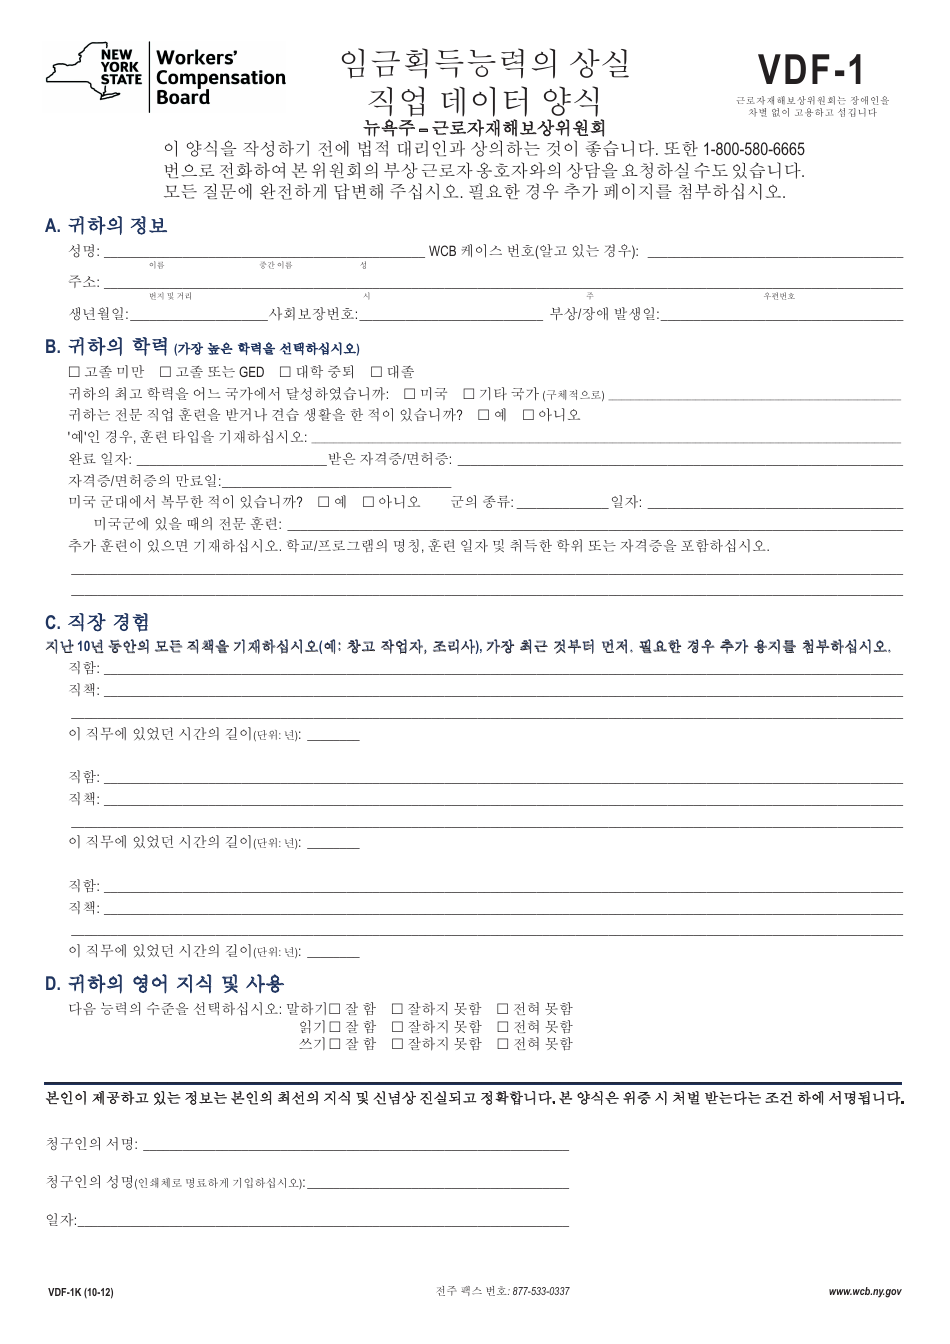 Form VDF-1K Loss of Wage Earning Capacity Vocational Data Form - New York (Korean), Page 1